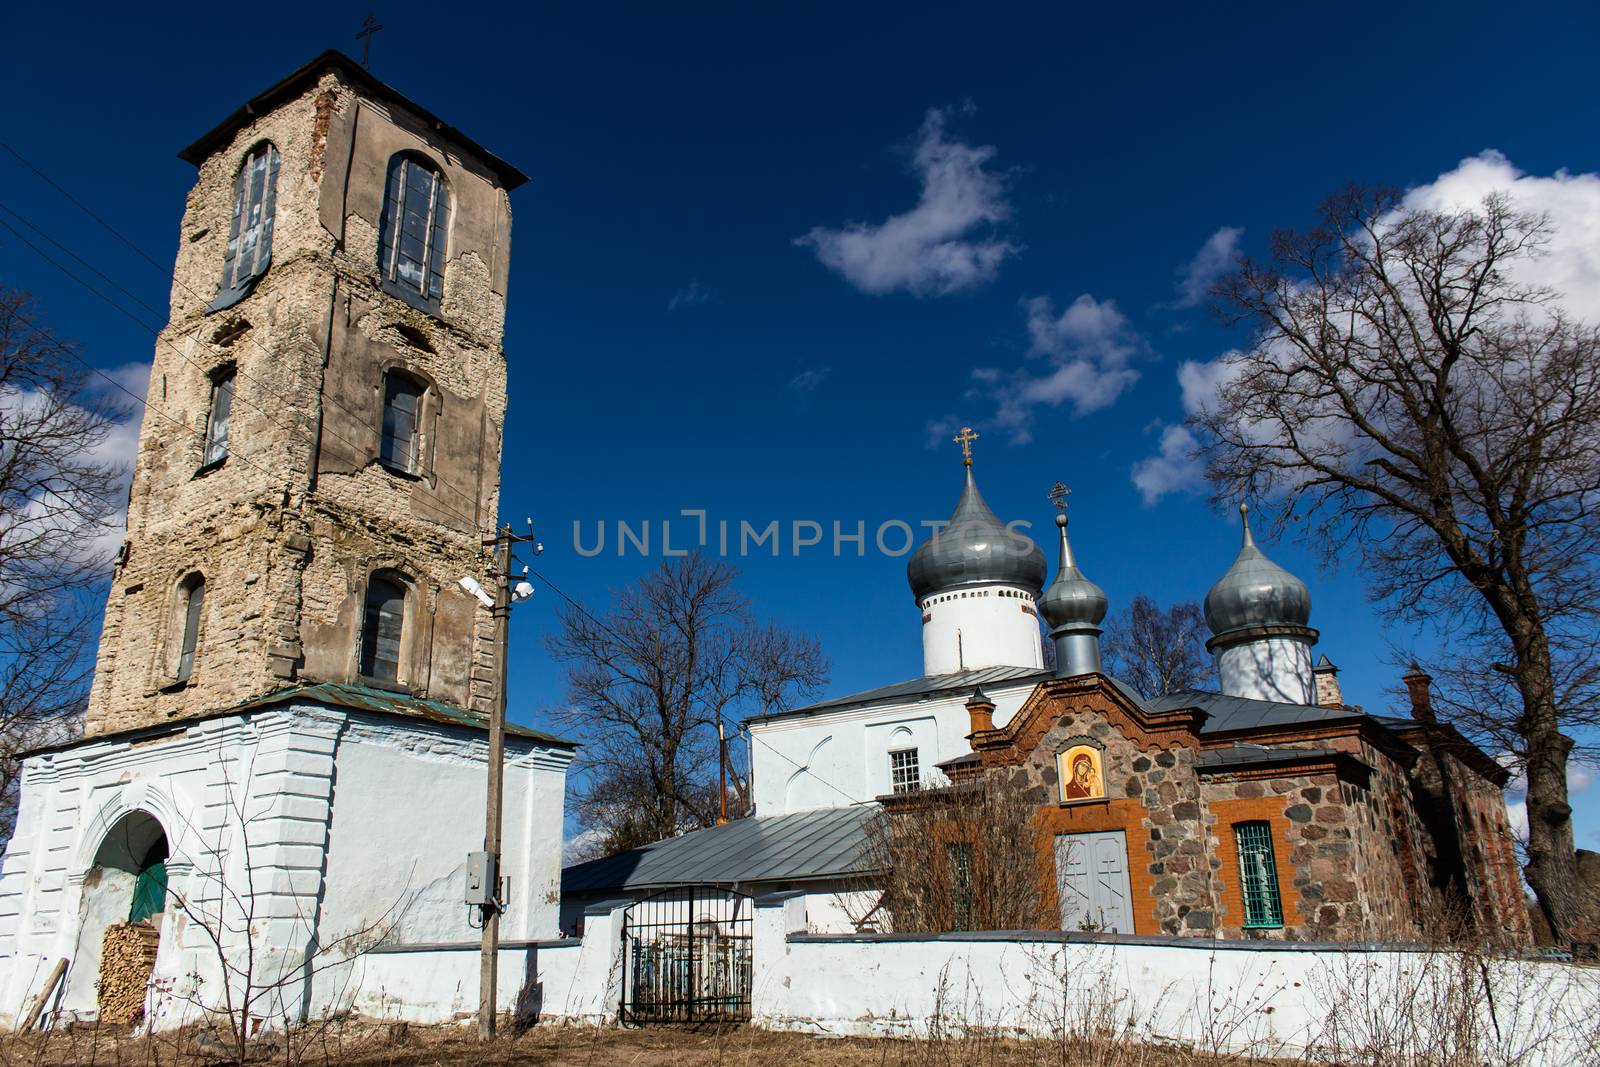 Orthodox Christian church next to the bell tower. Ancient buildings against a blue sky with white clouds. Sunny spring day. Deepest feeling of peace and tranquility.